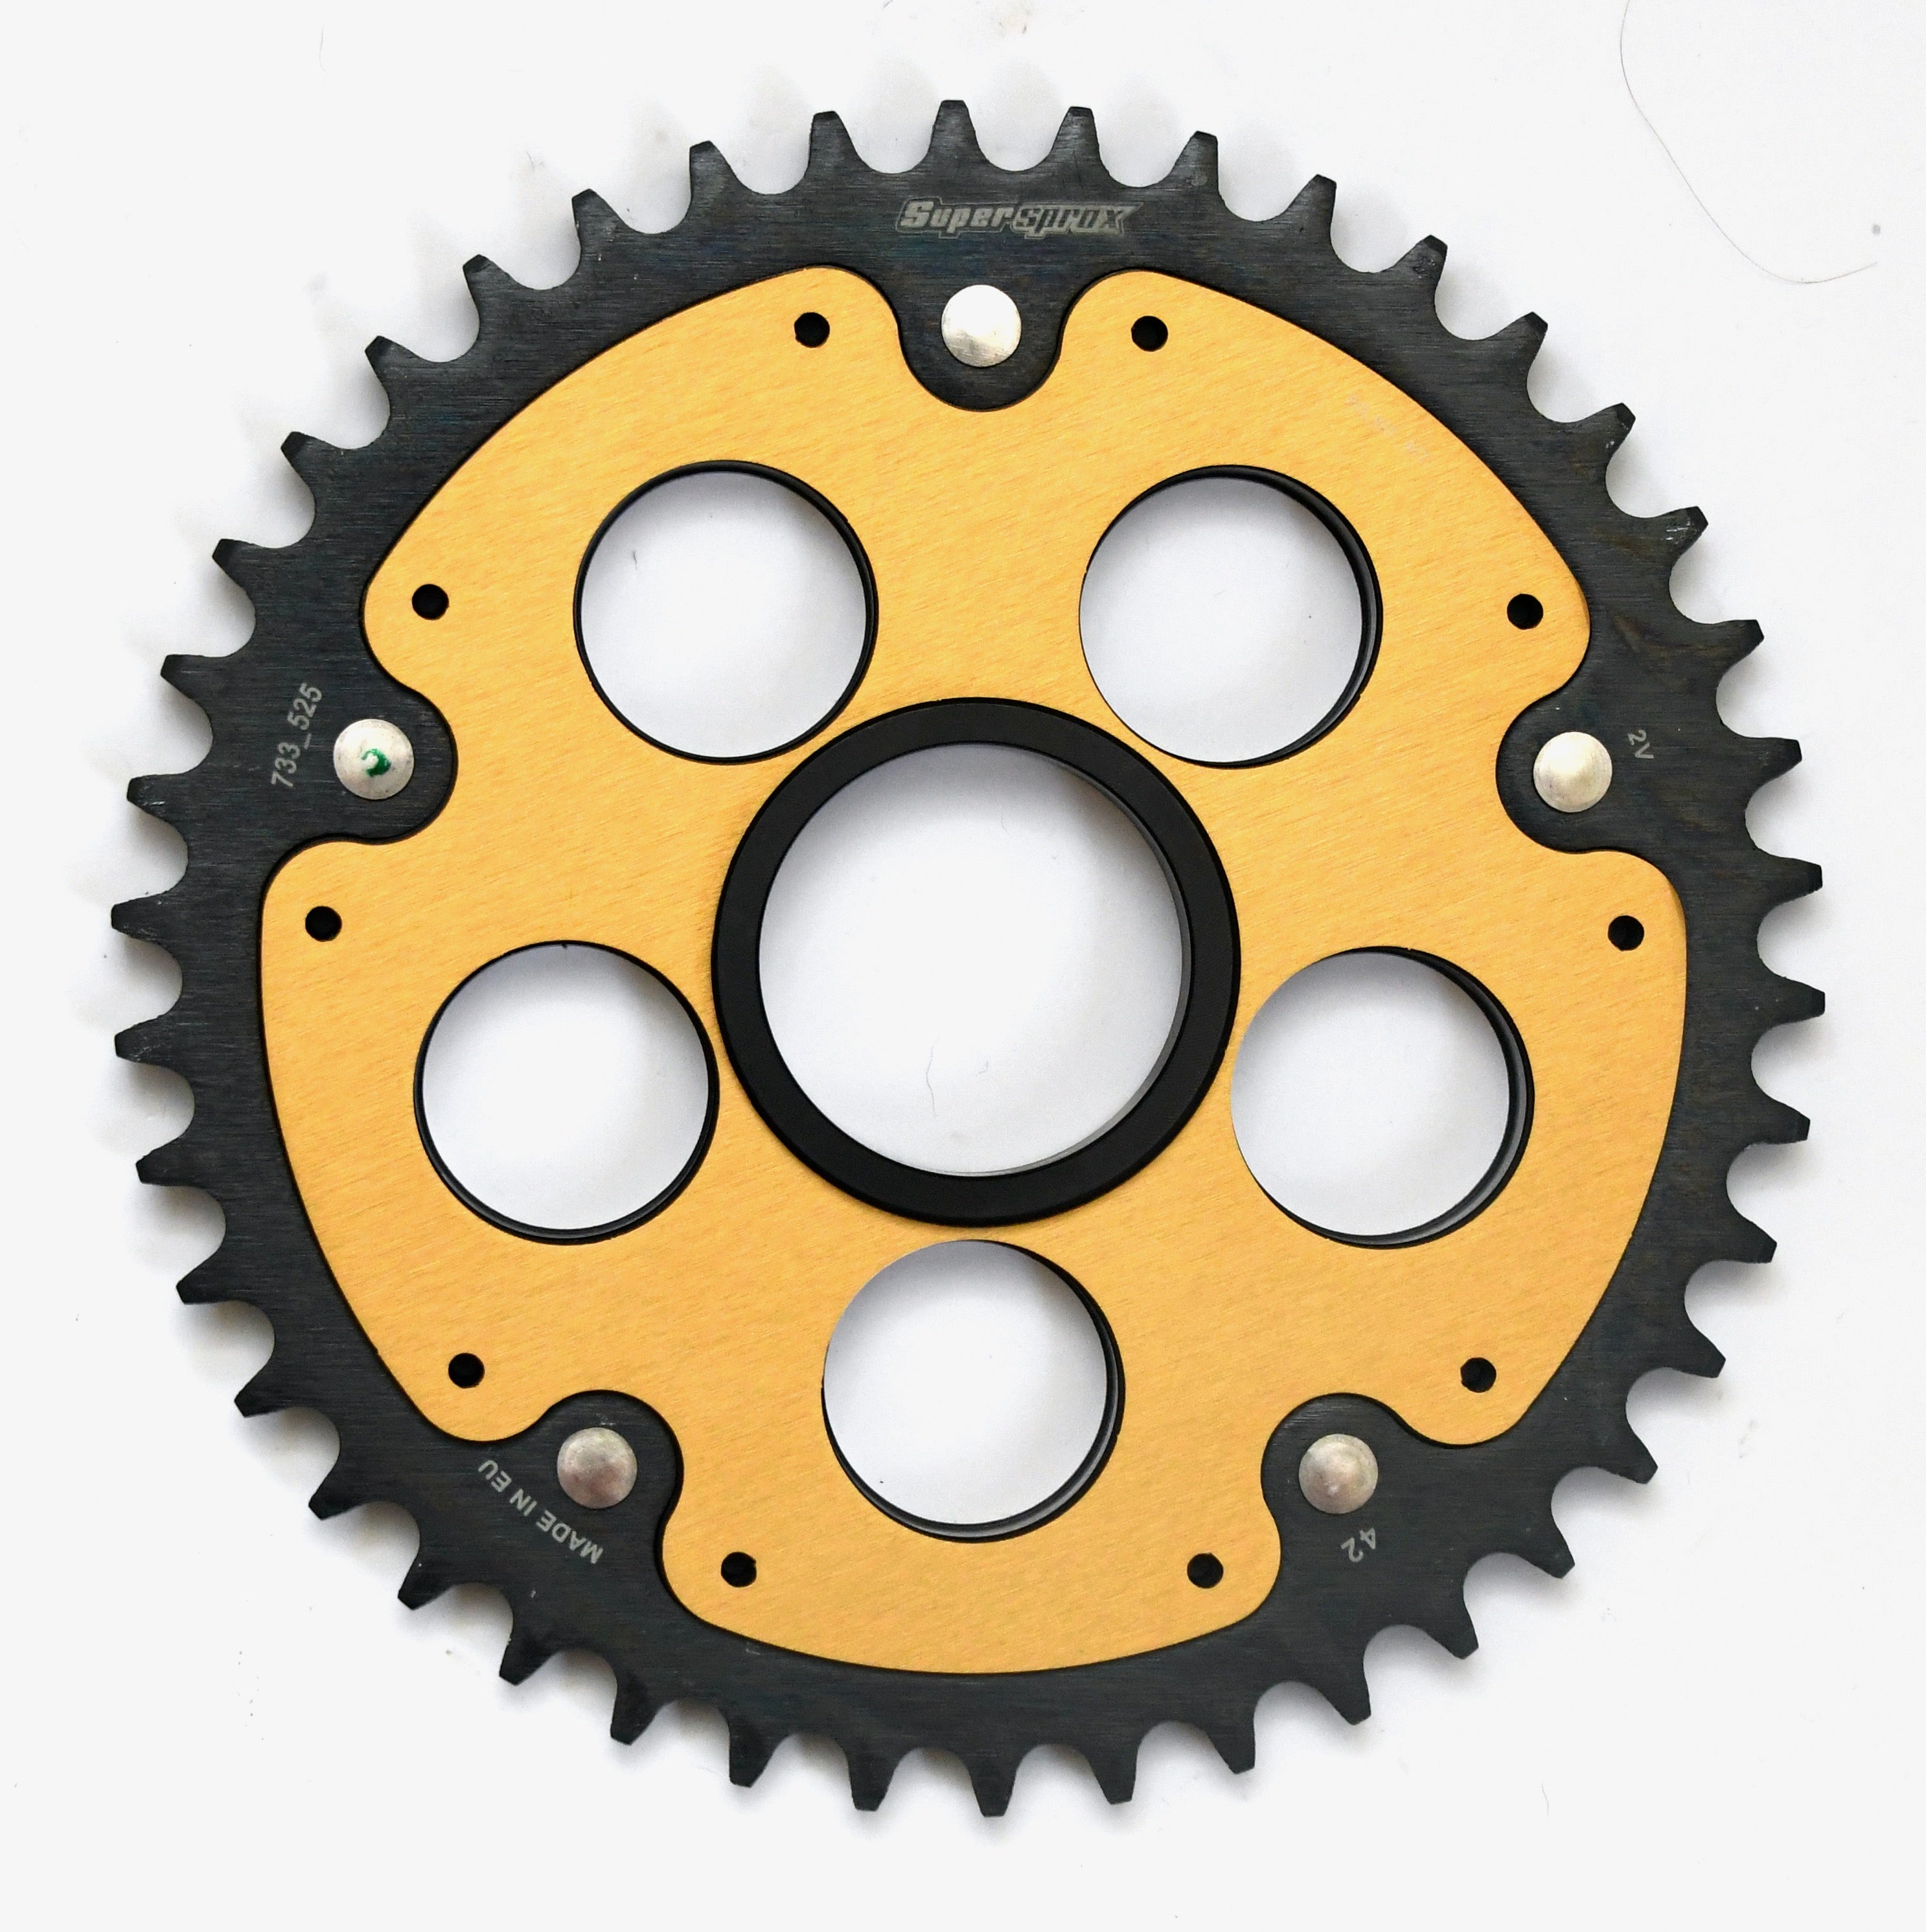 Supersprox Edge Stealth Rear Sprocket RSA-733_525 - Choose Your Gearing